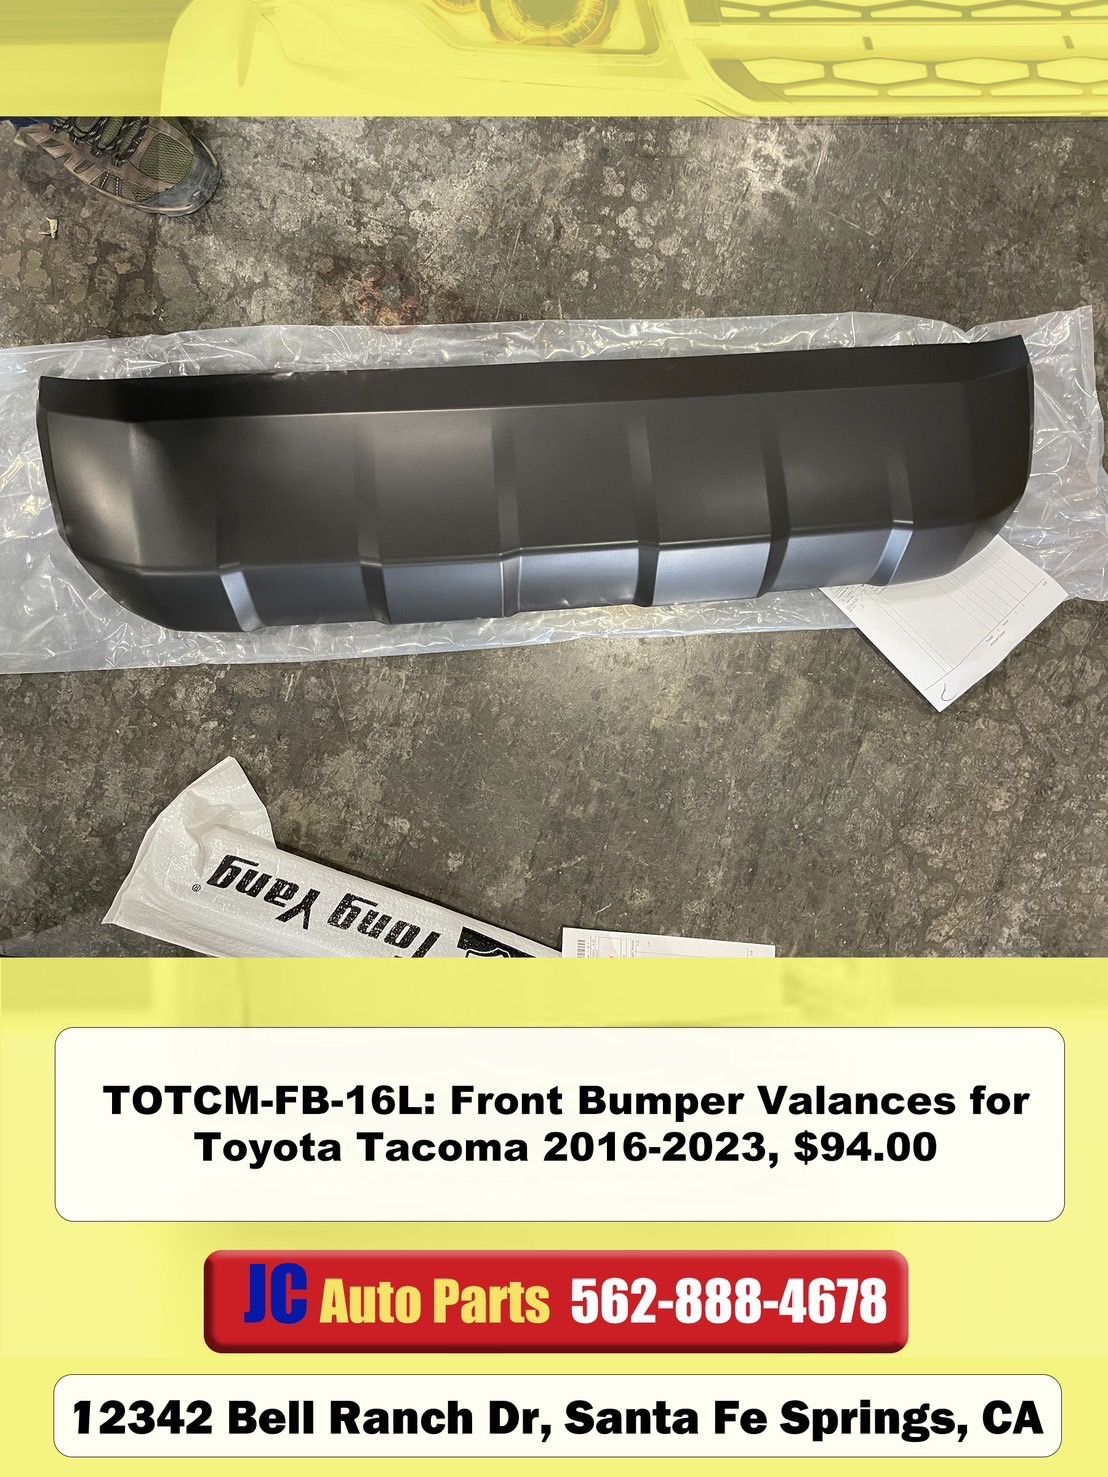 Front Bumper Valances For Toyota Tacoma 2016 2017 2018 2019 2020 2021 2022 2023